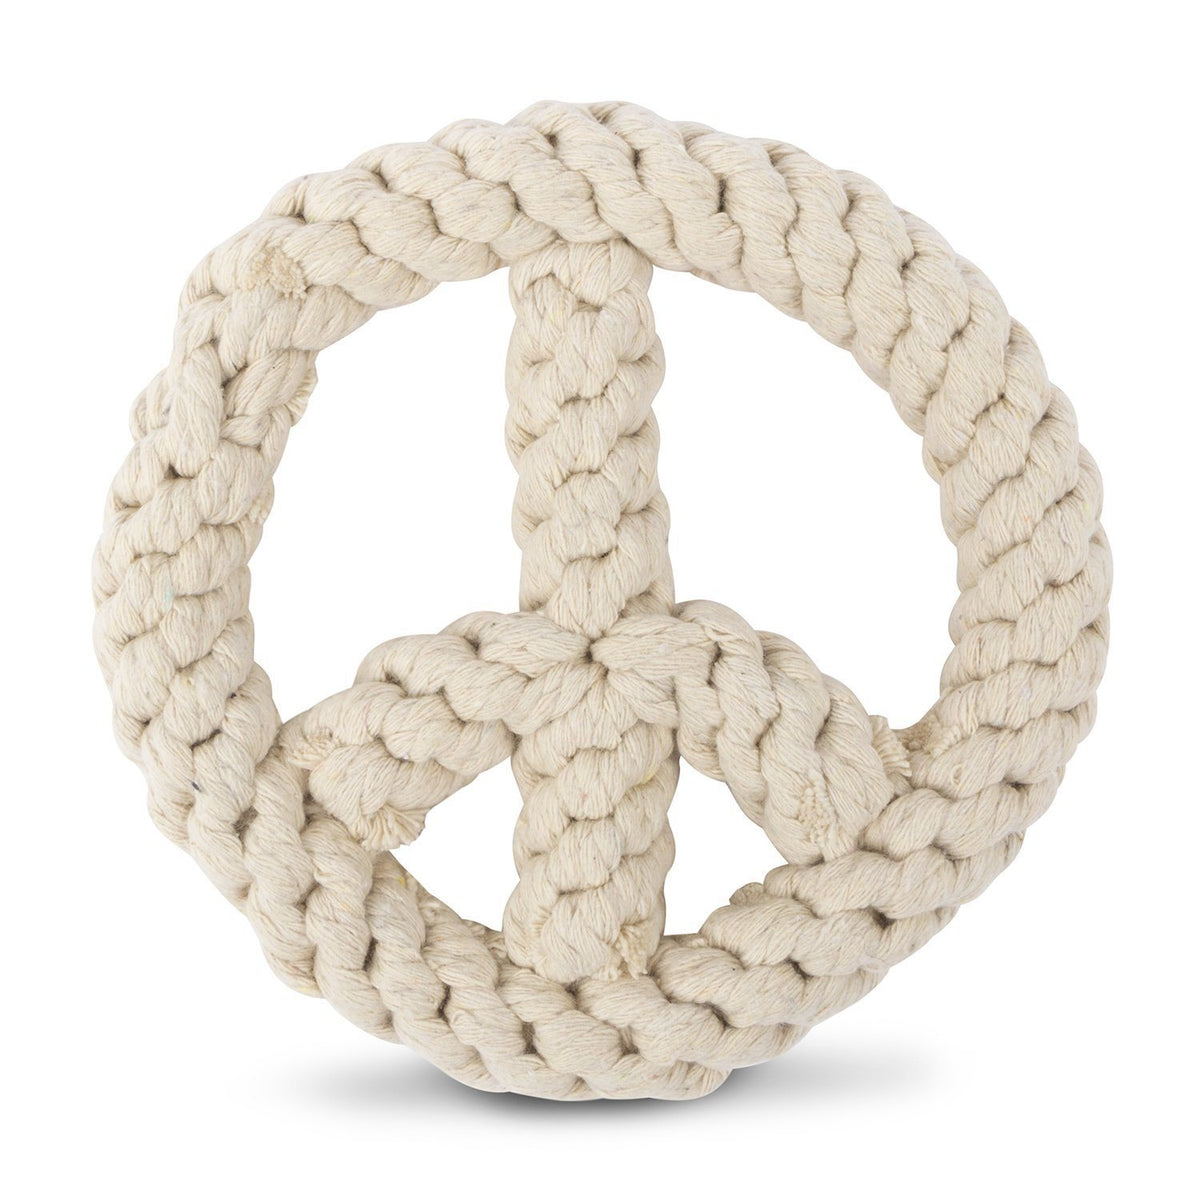 Rope Toy - Peace On Earth Rope Dog Toy